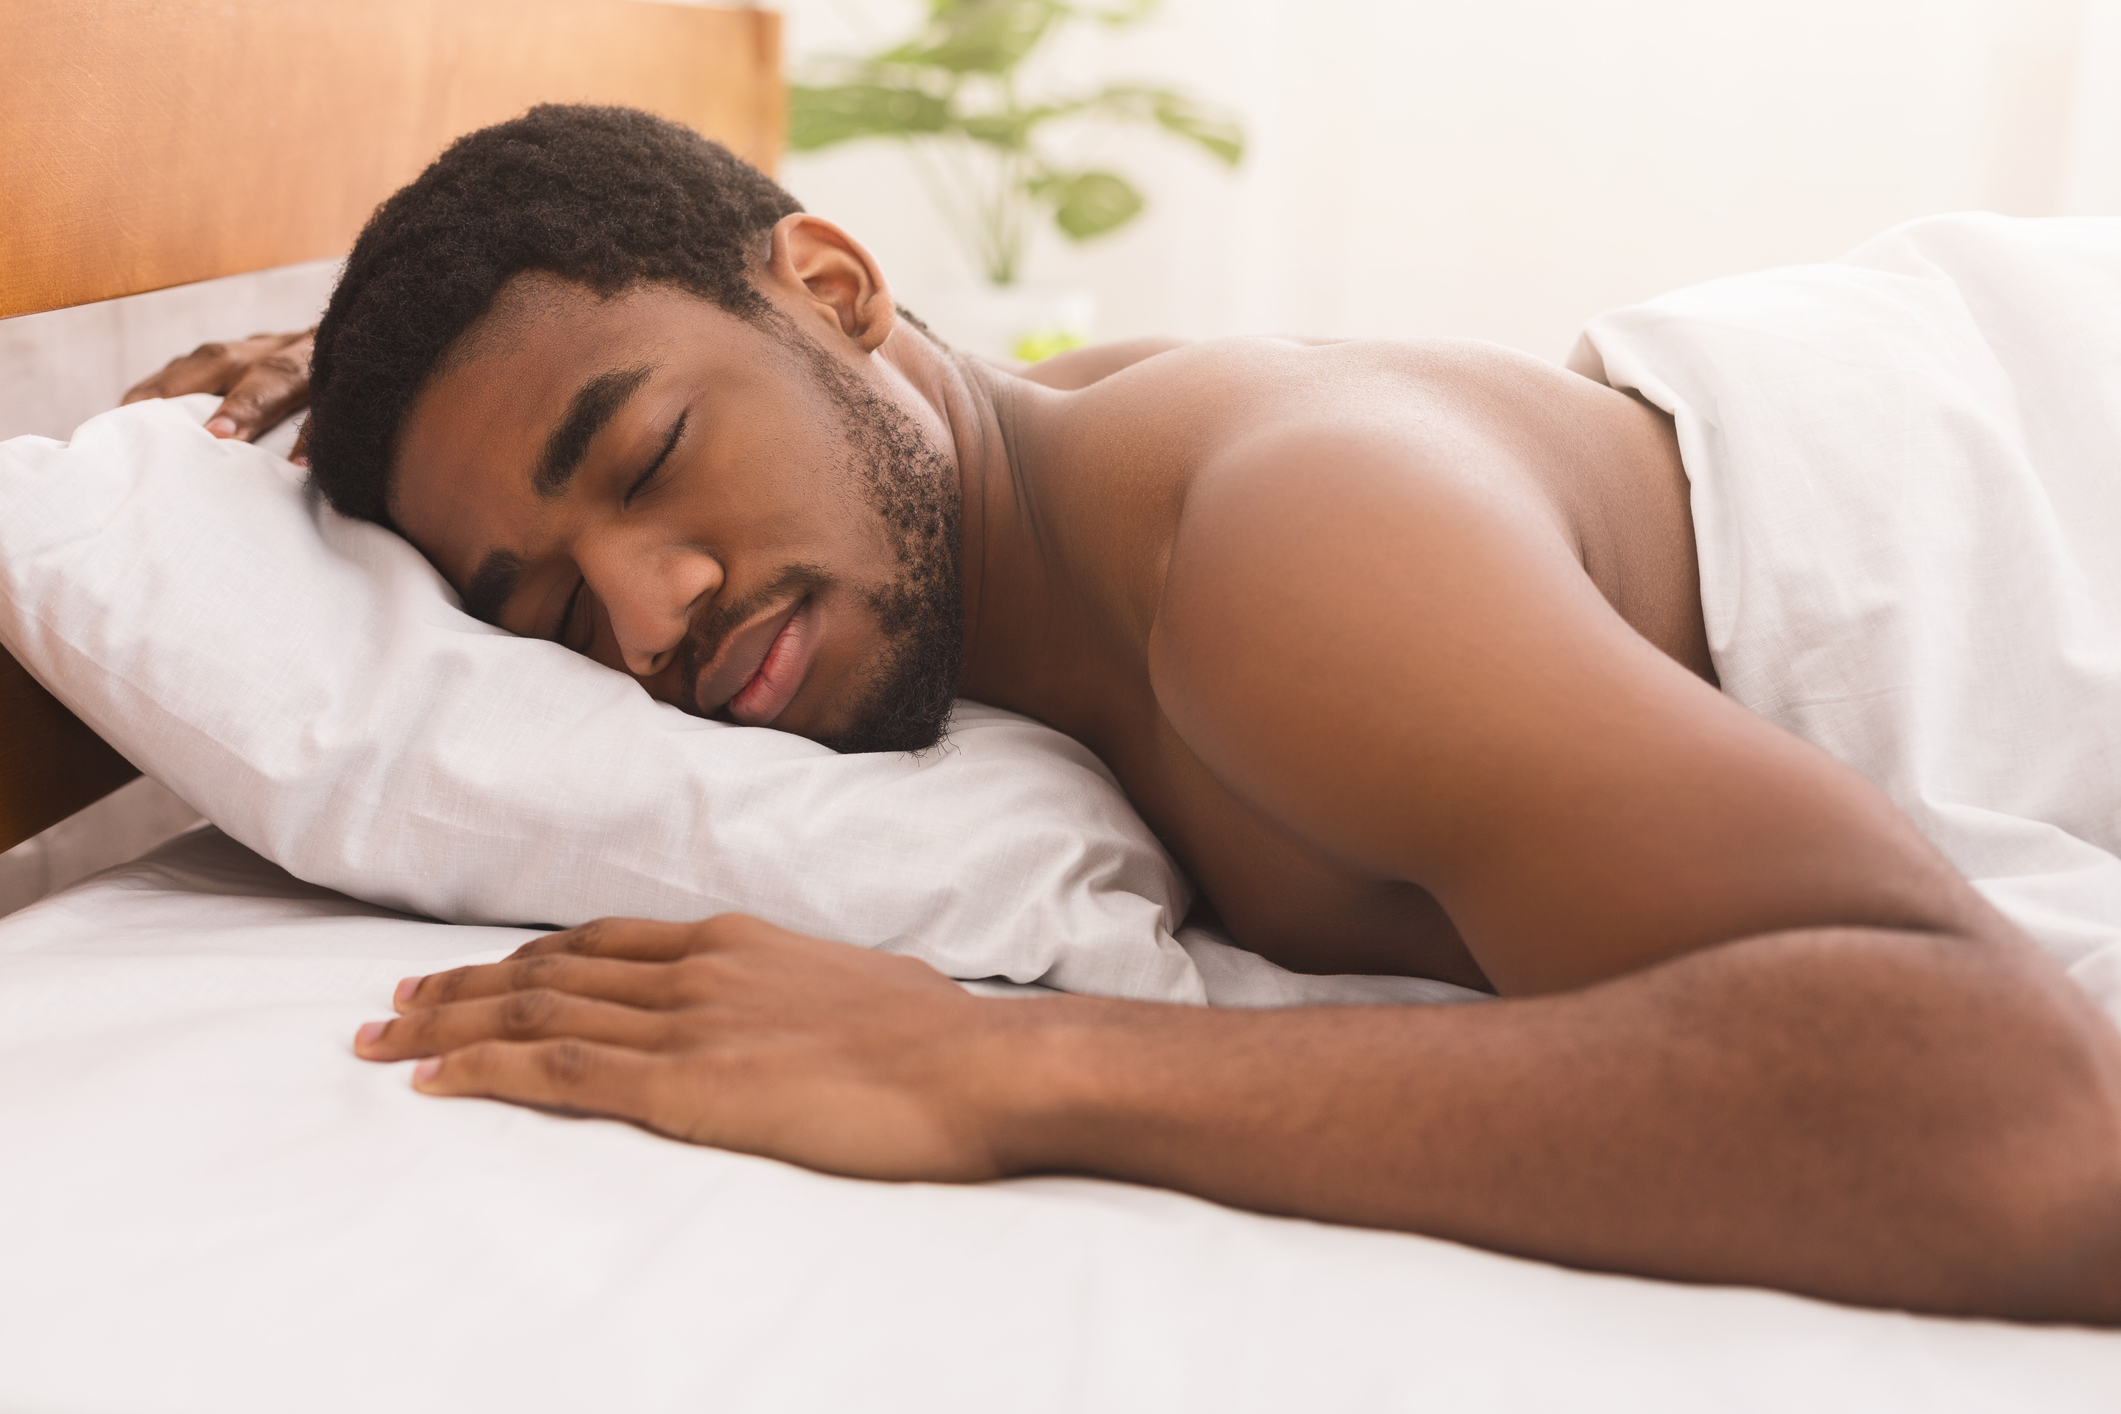 Is Sleeping Naked Better for Your Health? | Sleep Foundation